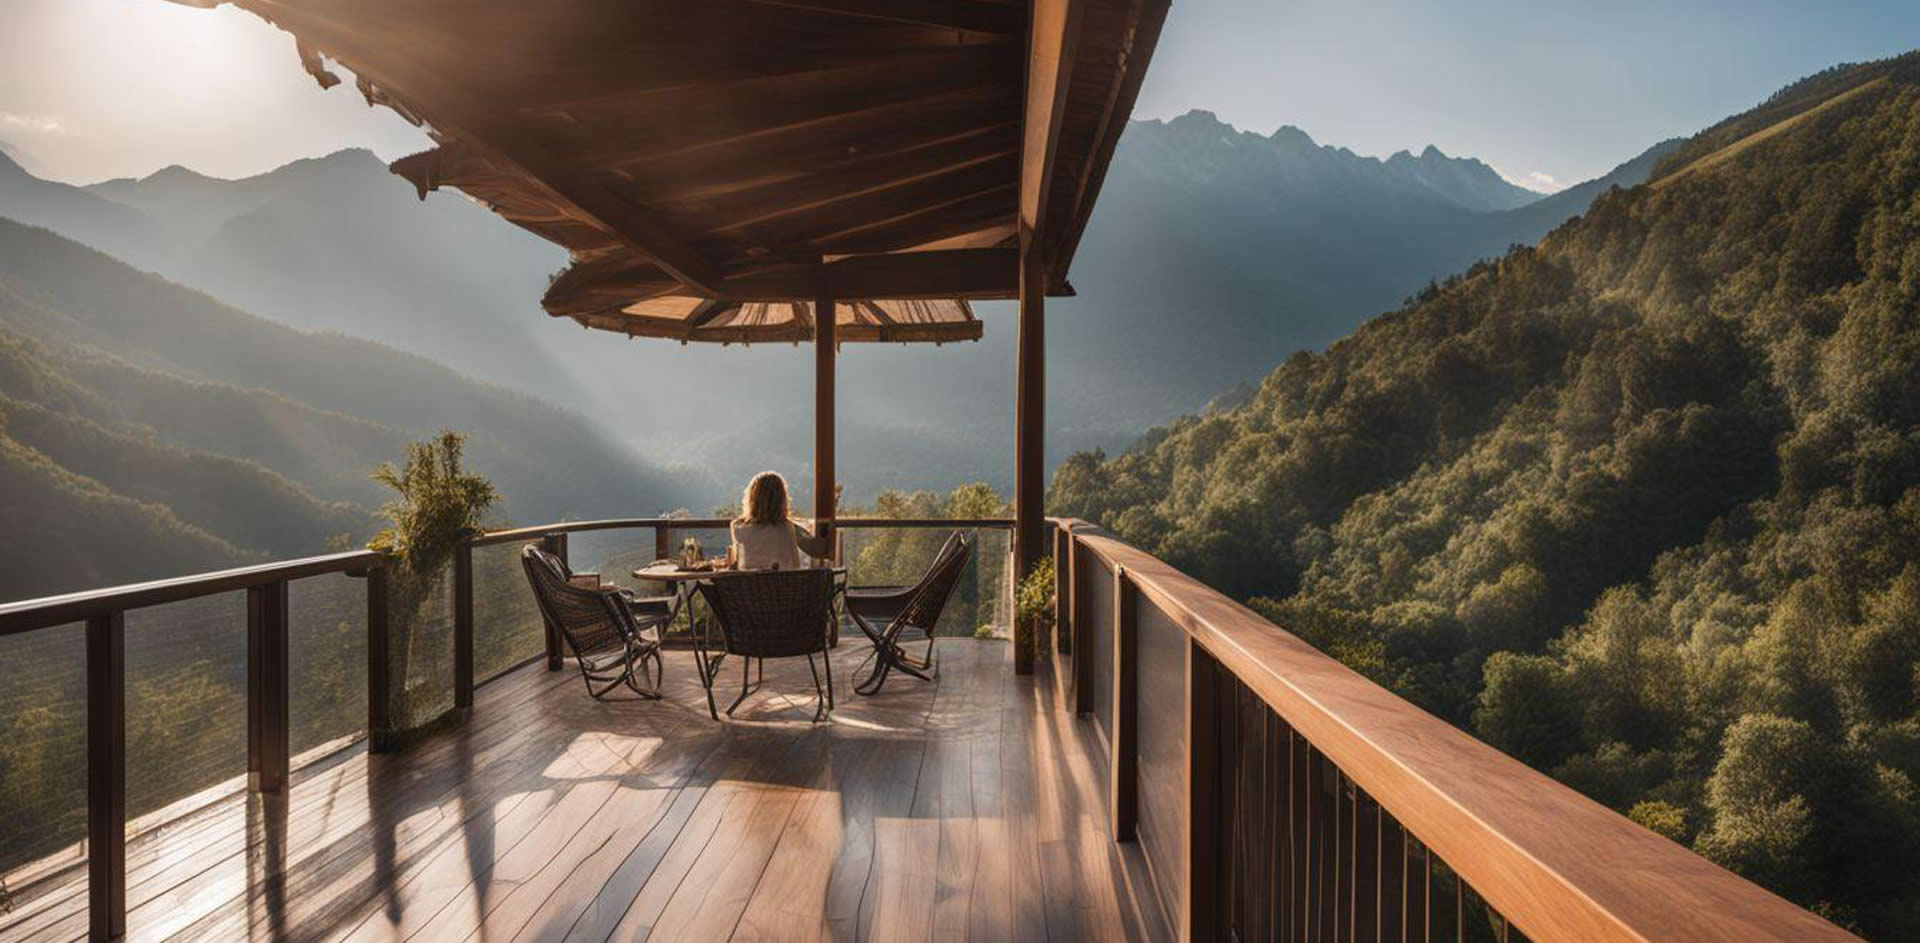 A person sitting at a table on a deck overlooking a mountain range